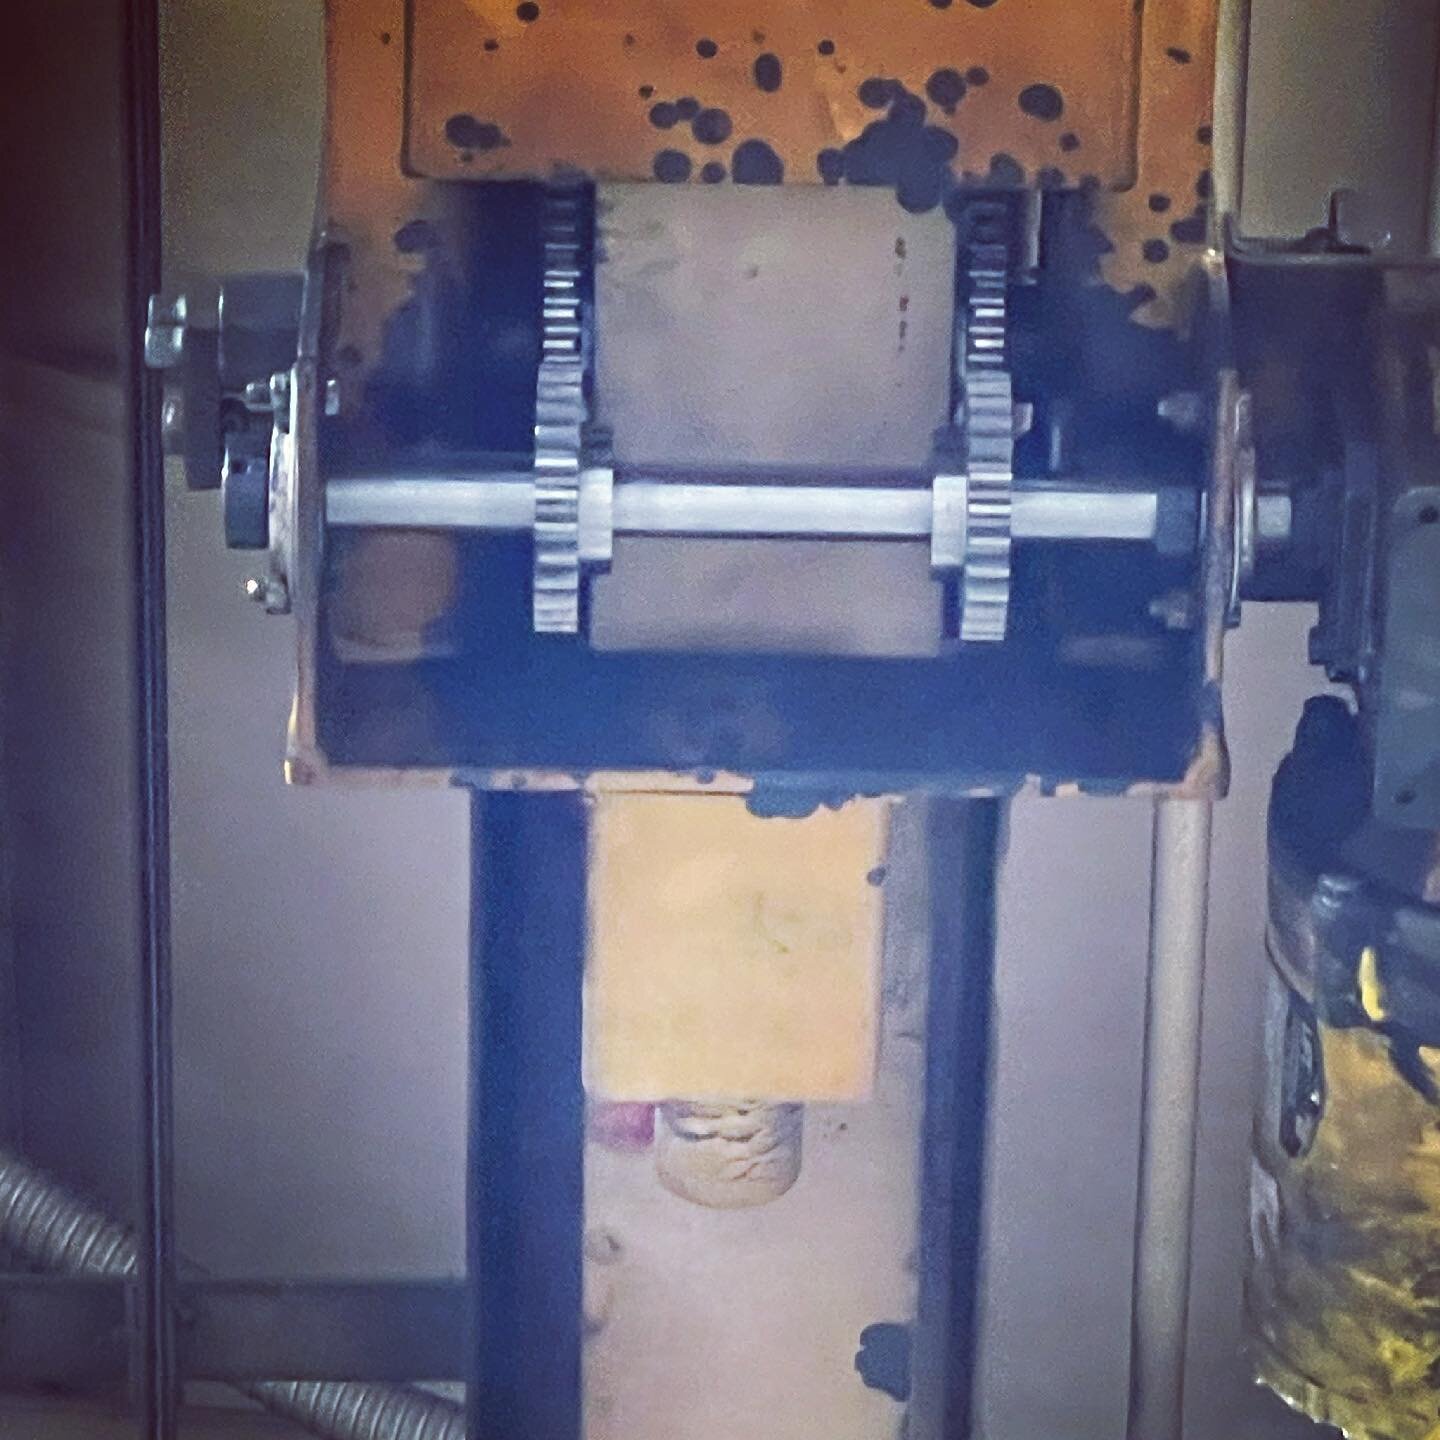 New gears in action #crane repair #fabrication #custommade  #industrialdesign